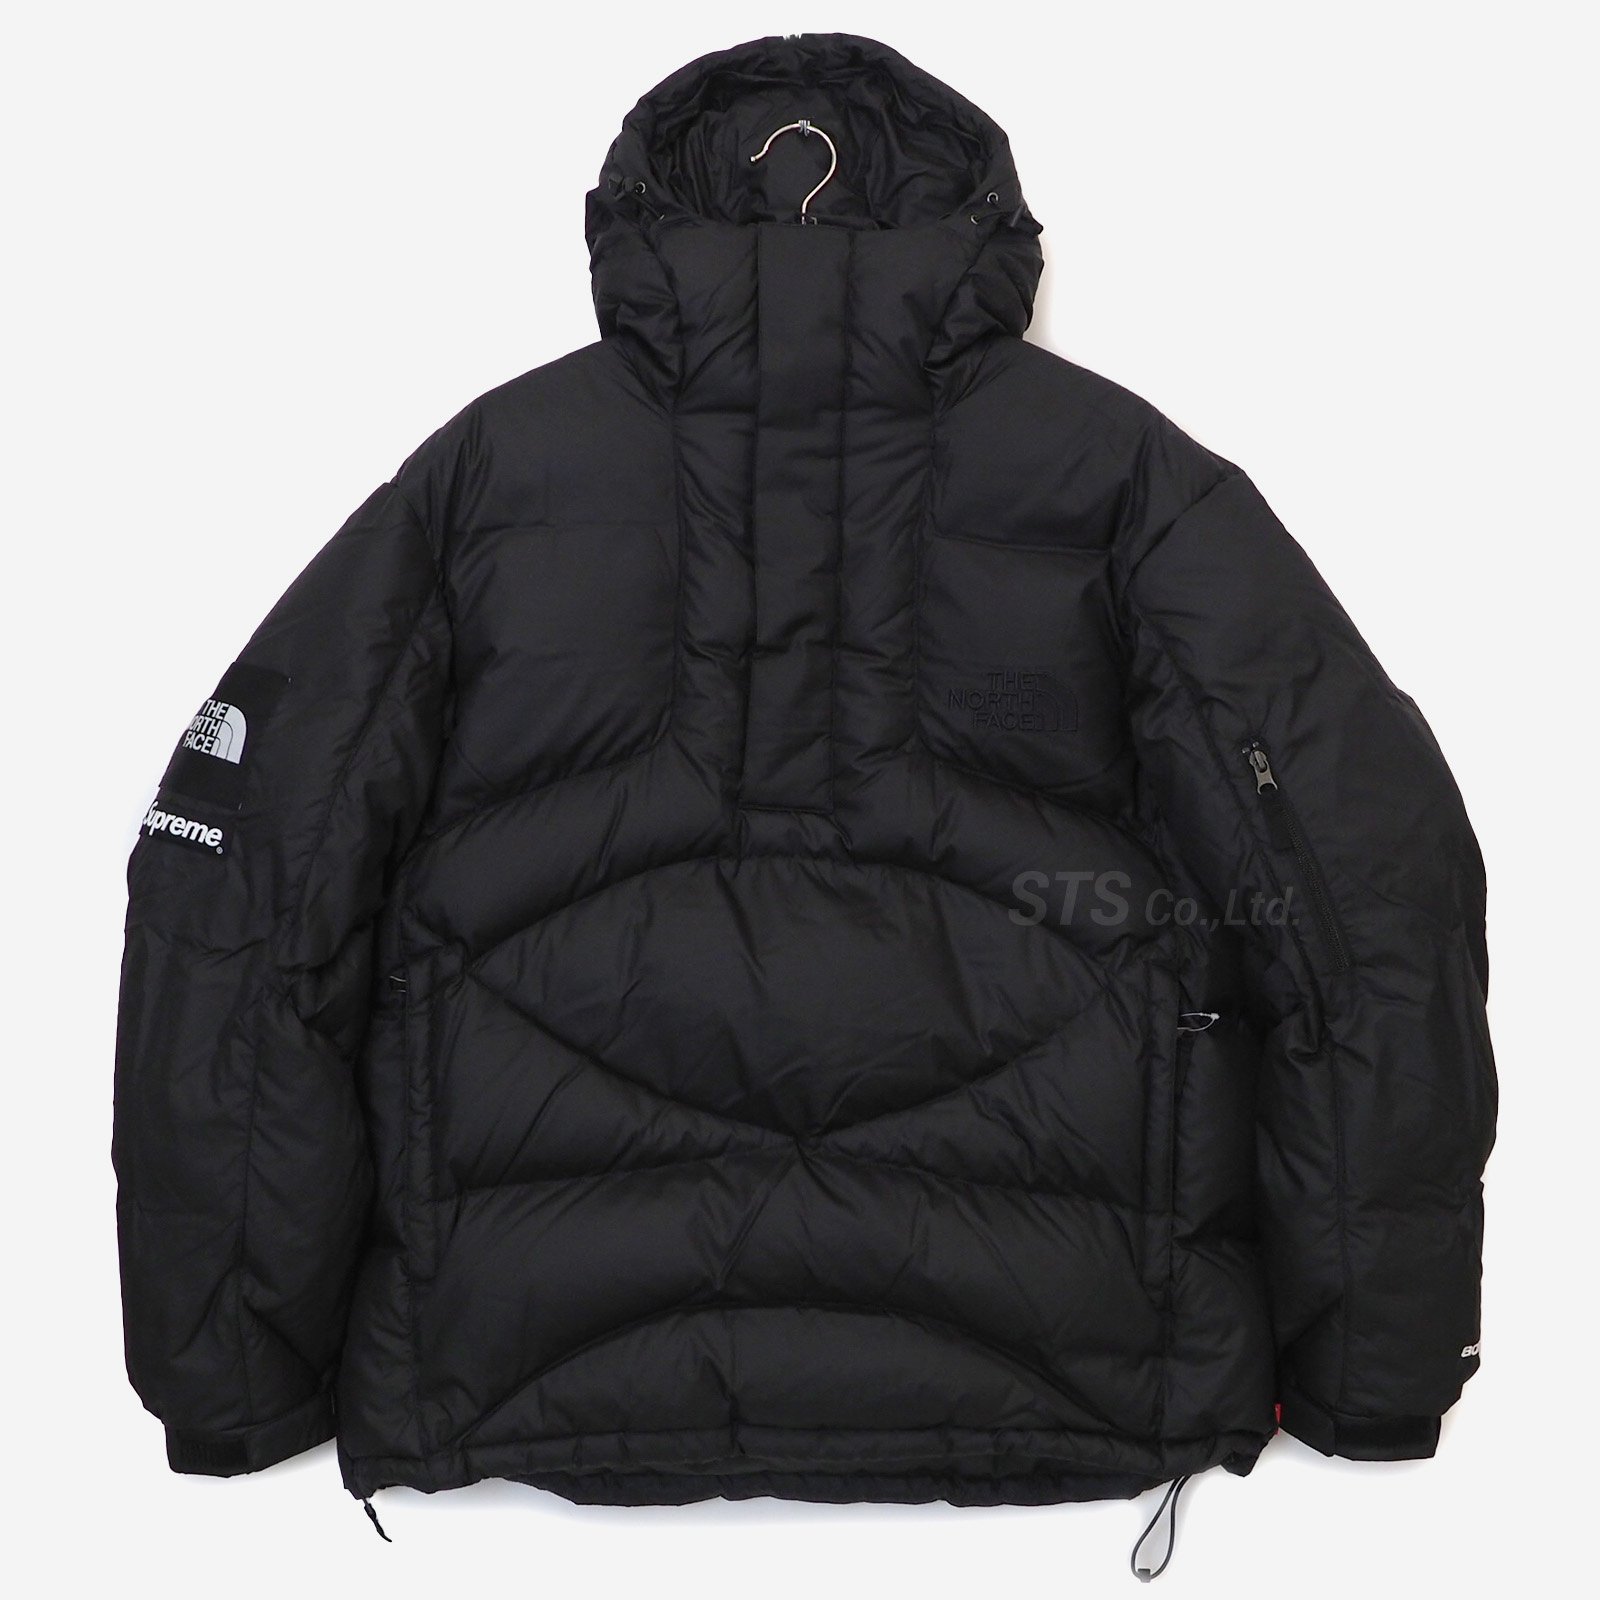 Supreme/The North Face 800-Fill Half Zip Hooded Pullober - ParkSIDER